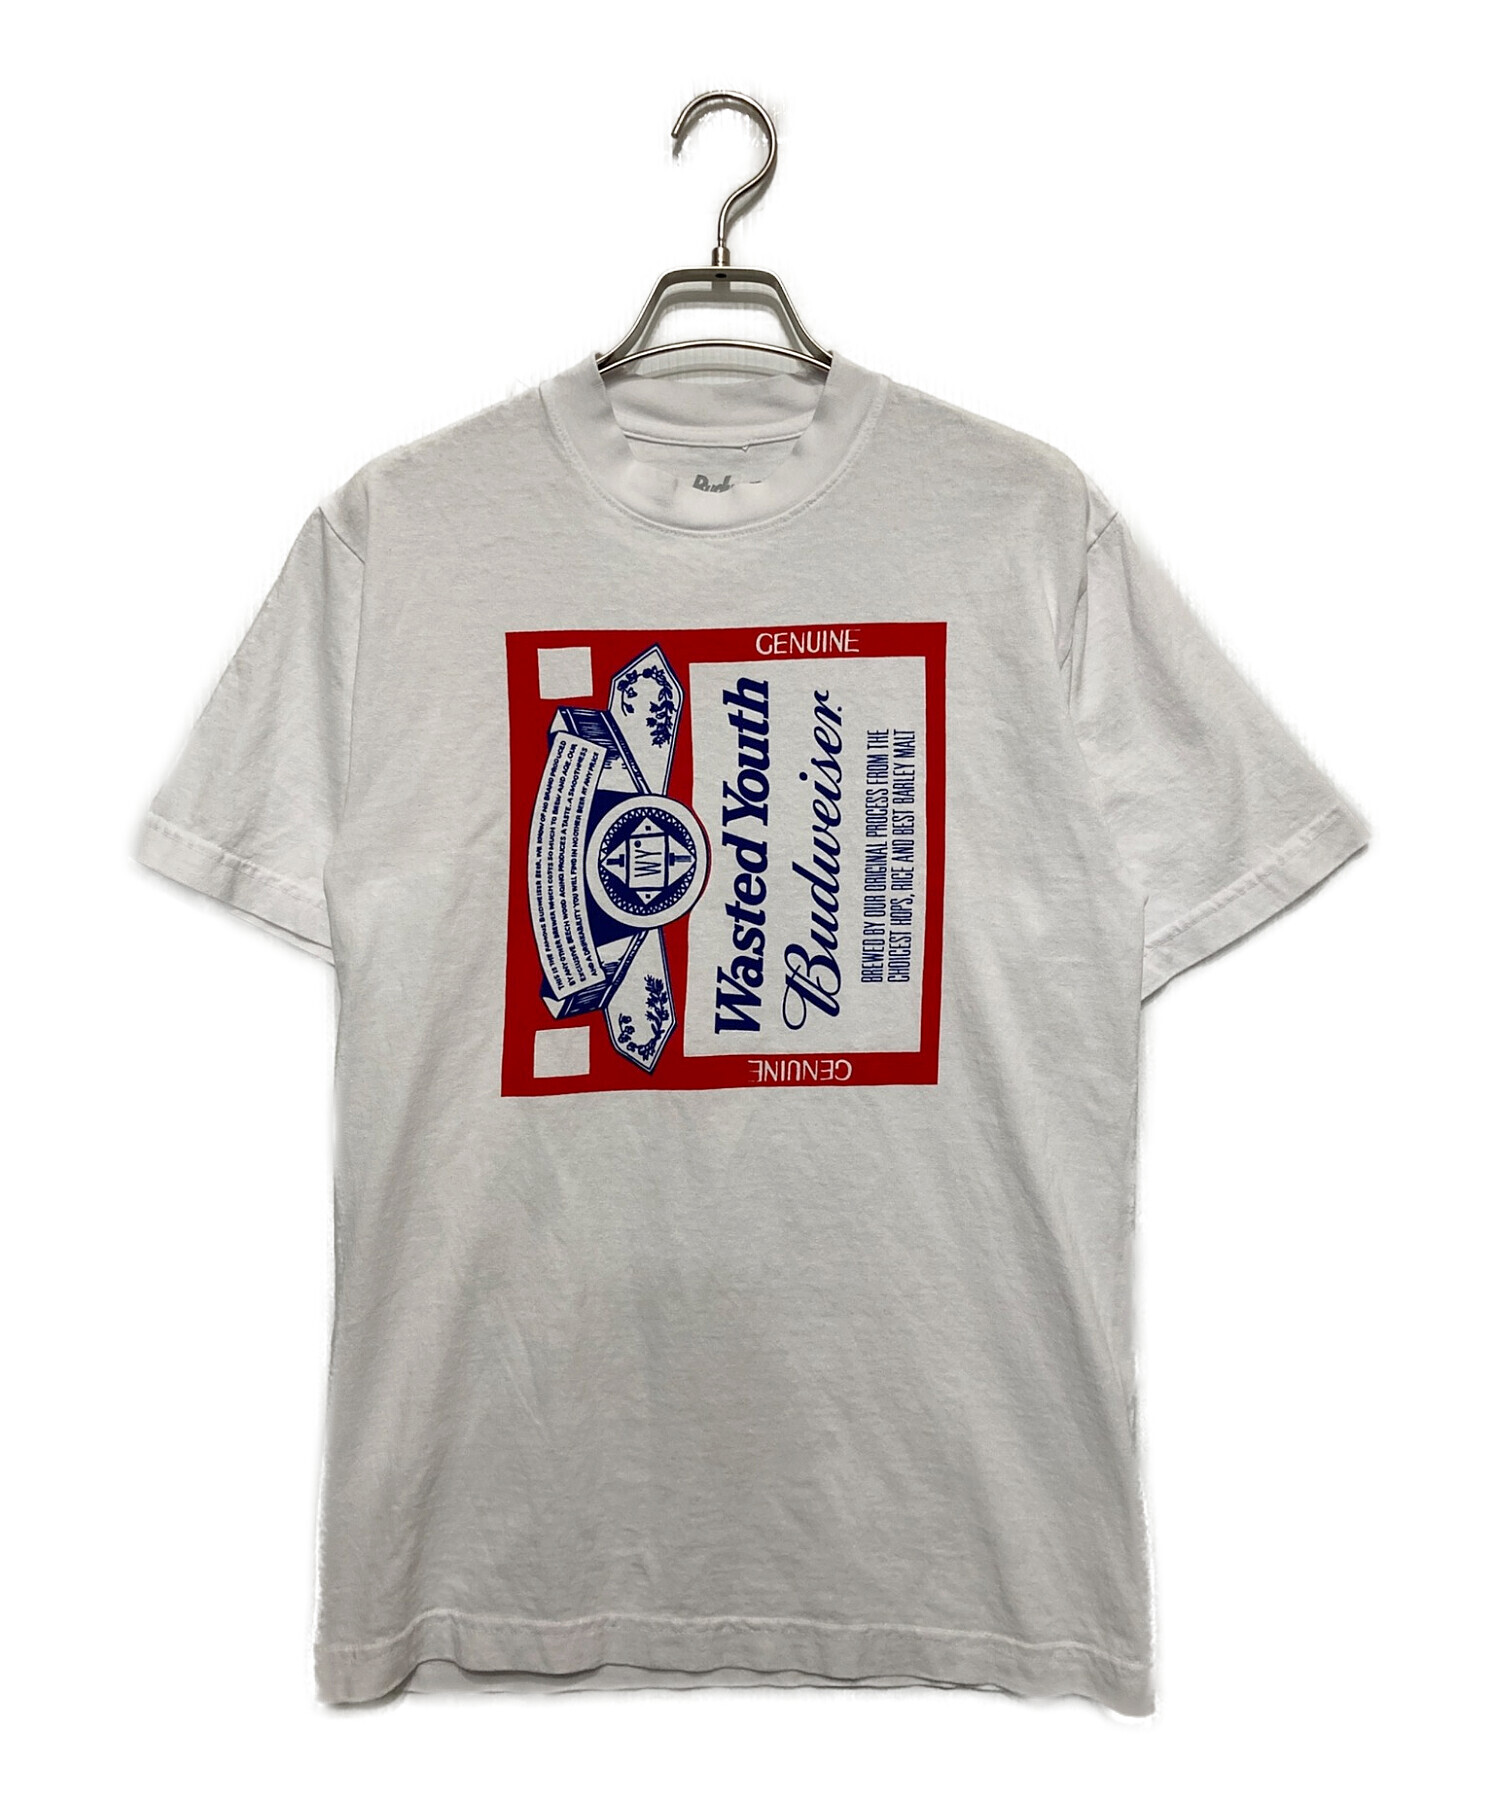 Wasted Youth x Budweiser S/S T　白　Lサイズ